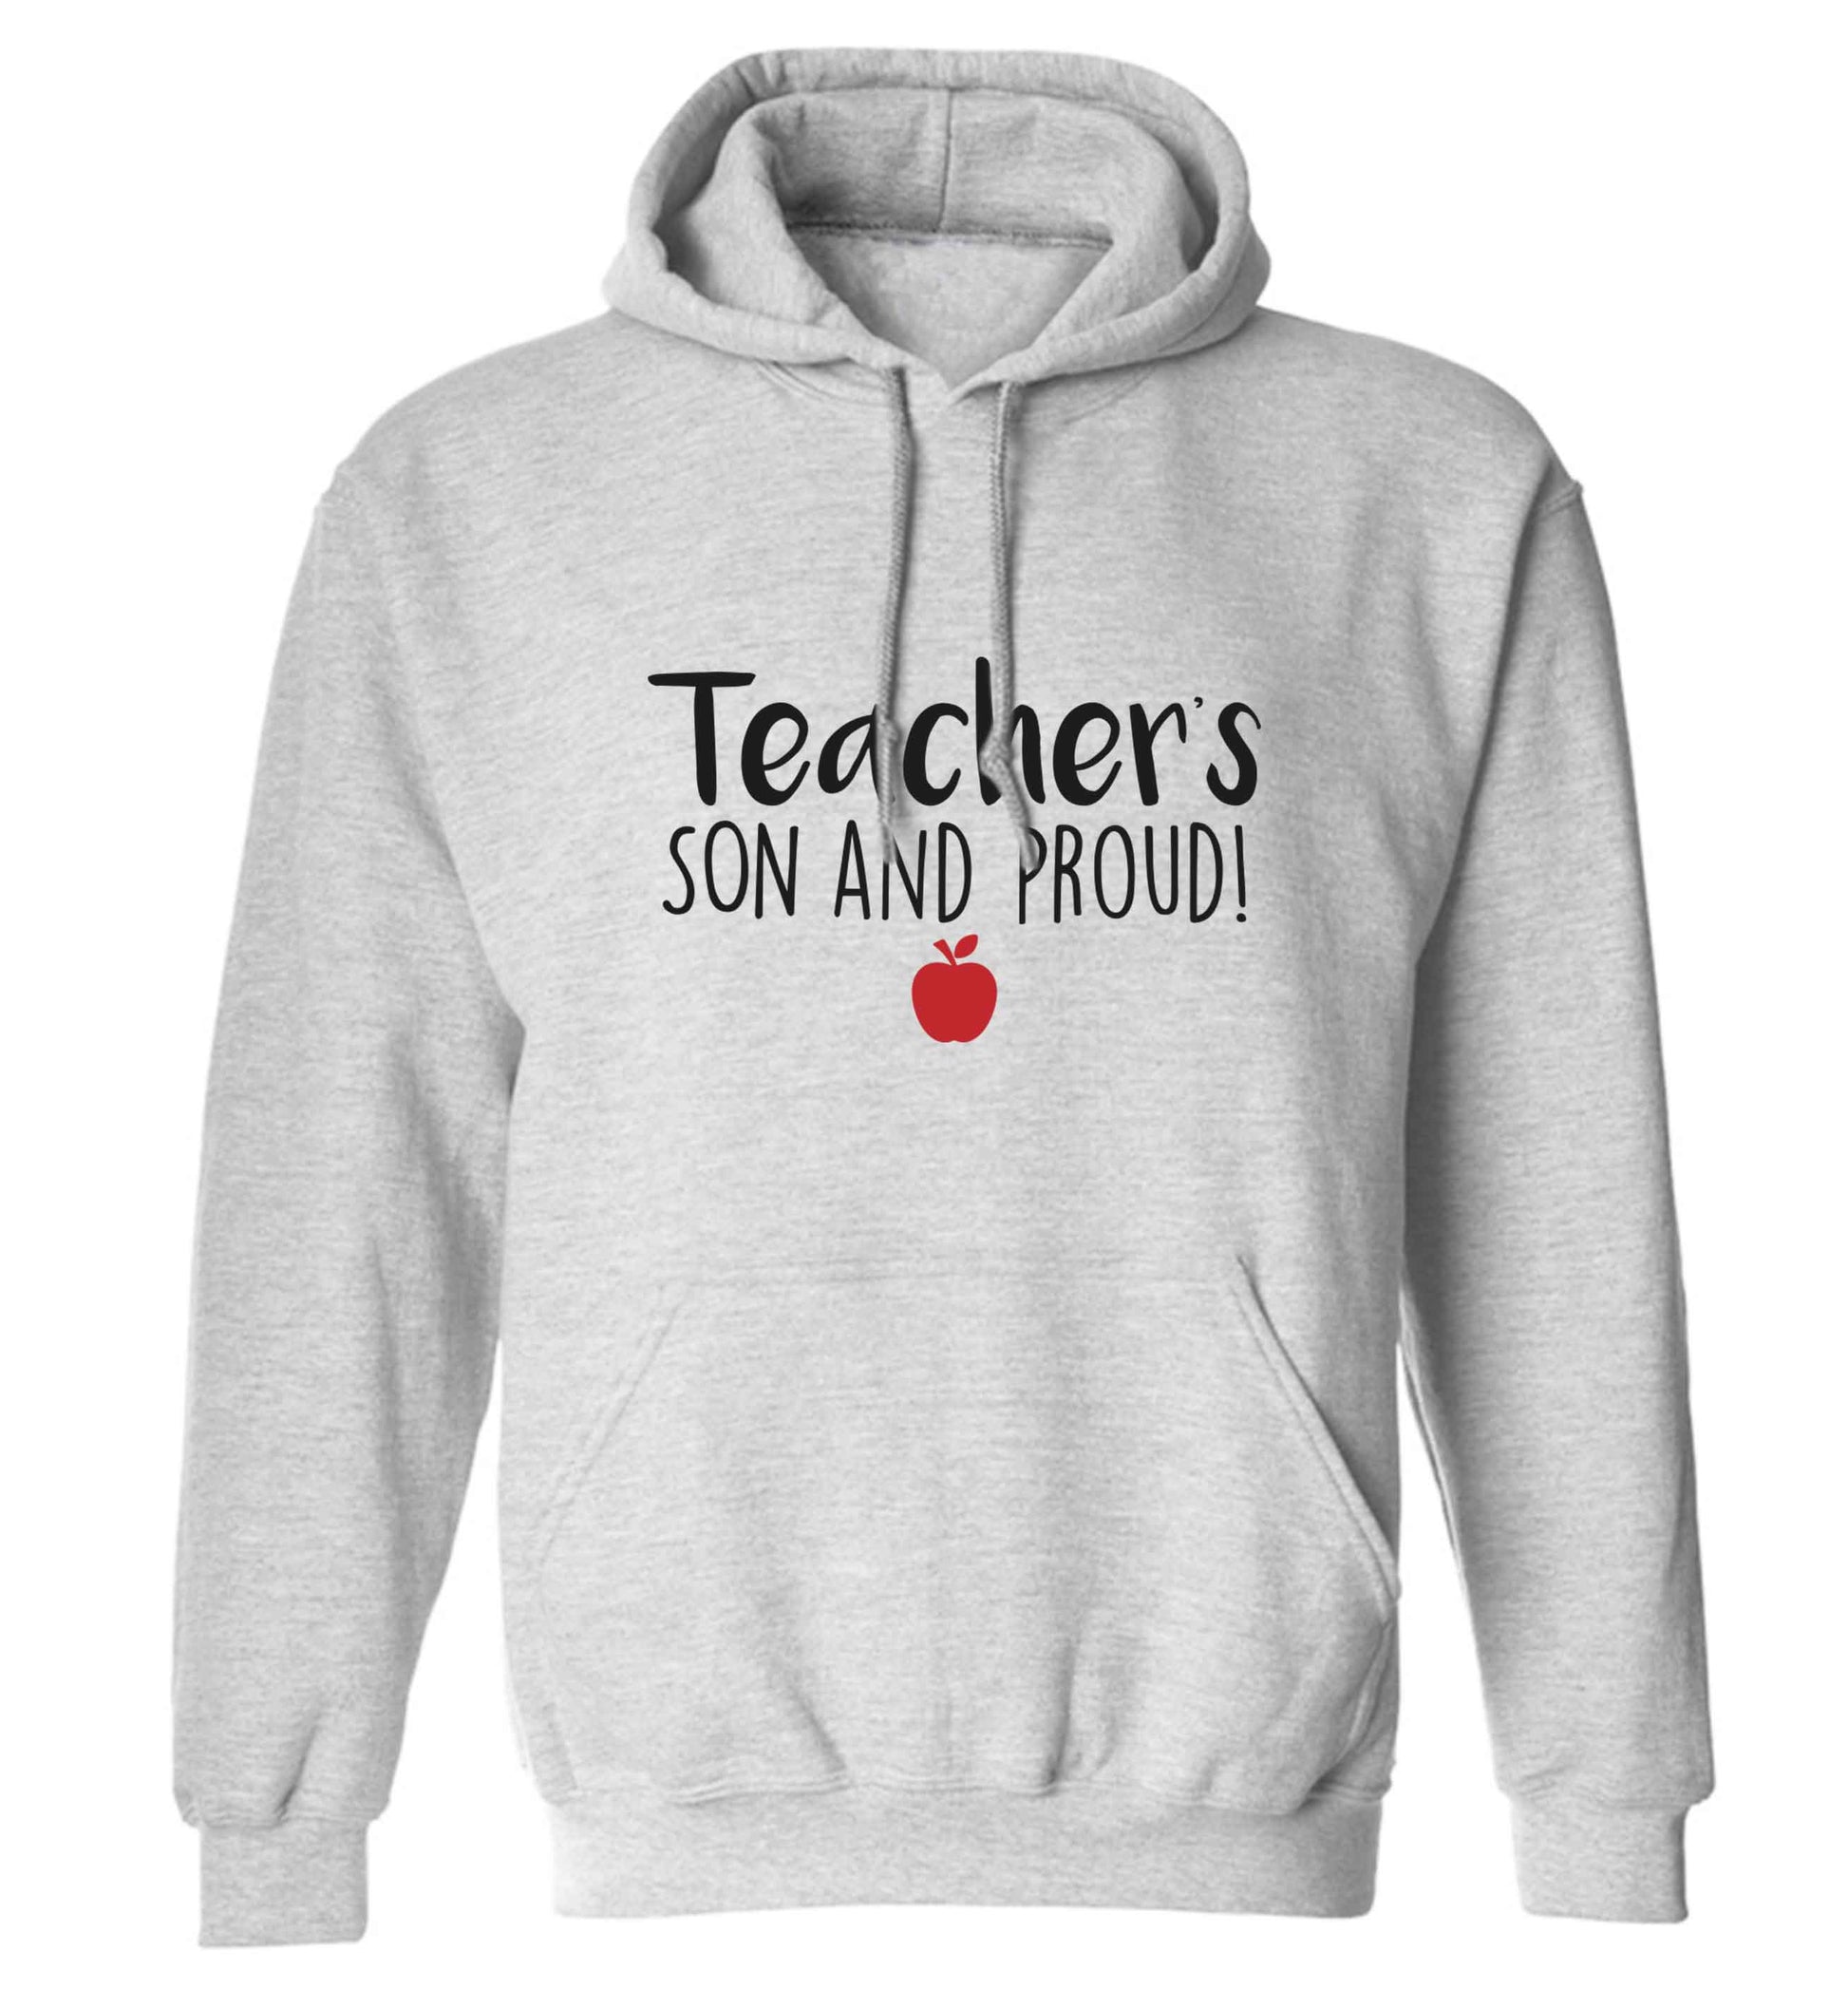 Teachers son and proud adults unisex grey hoodie 2XL